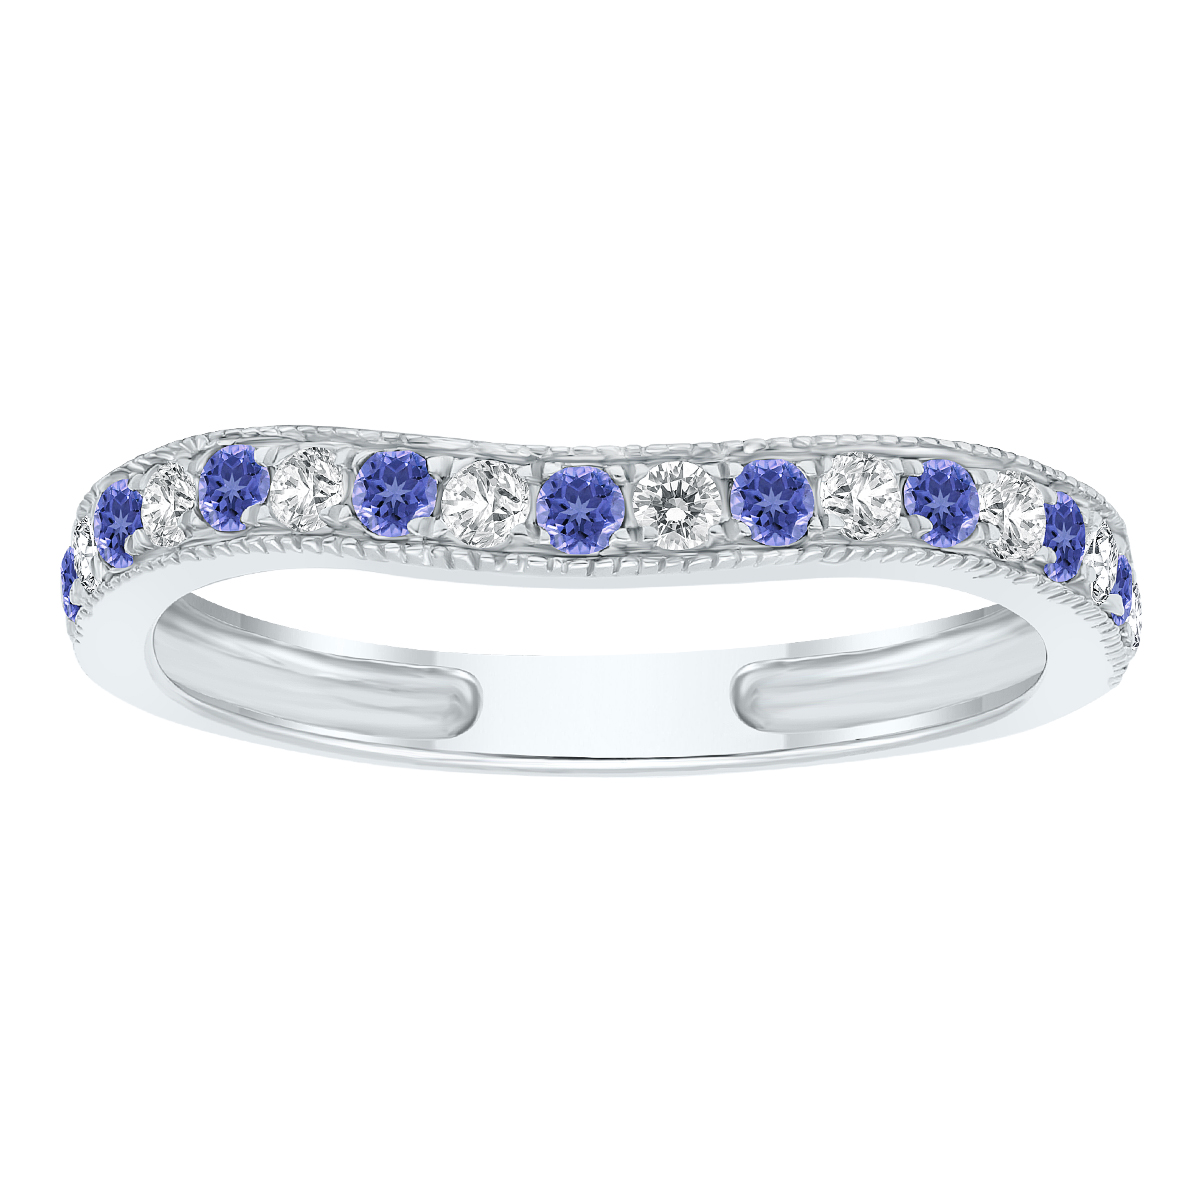 Tanzanite and Diamond Channel Set Wedding Band in 10K White Gold